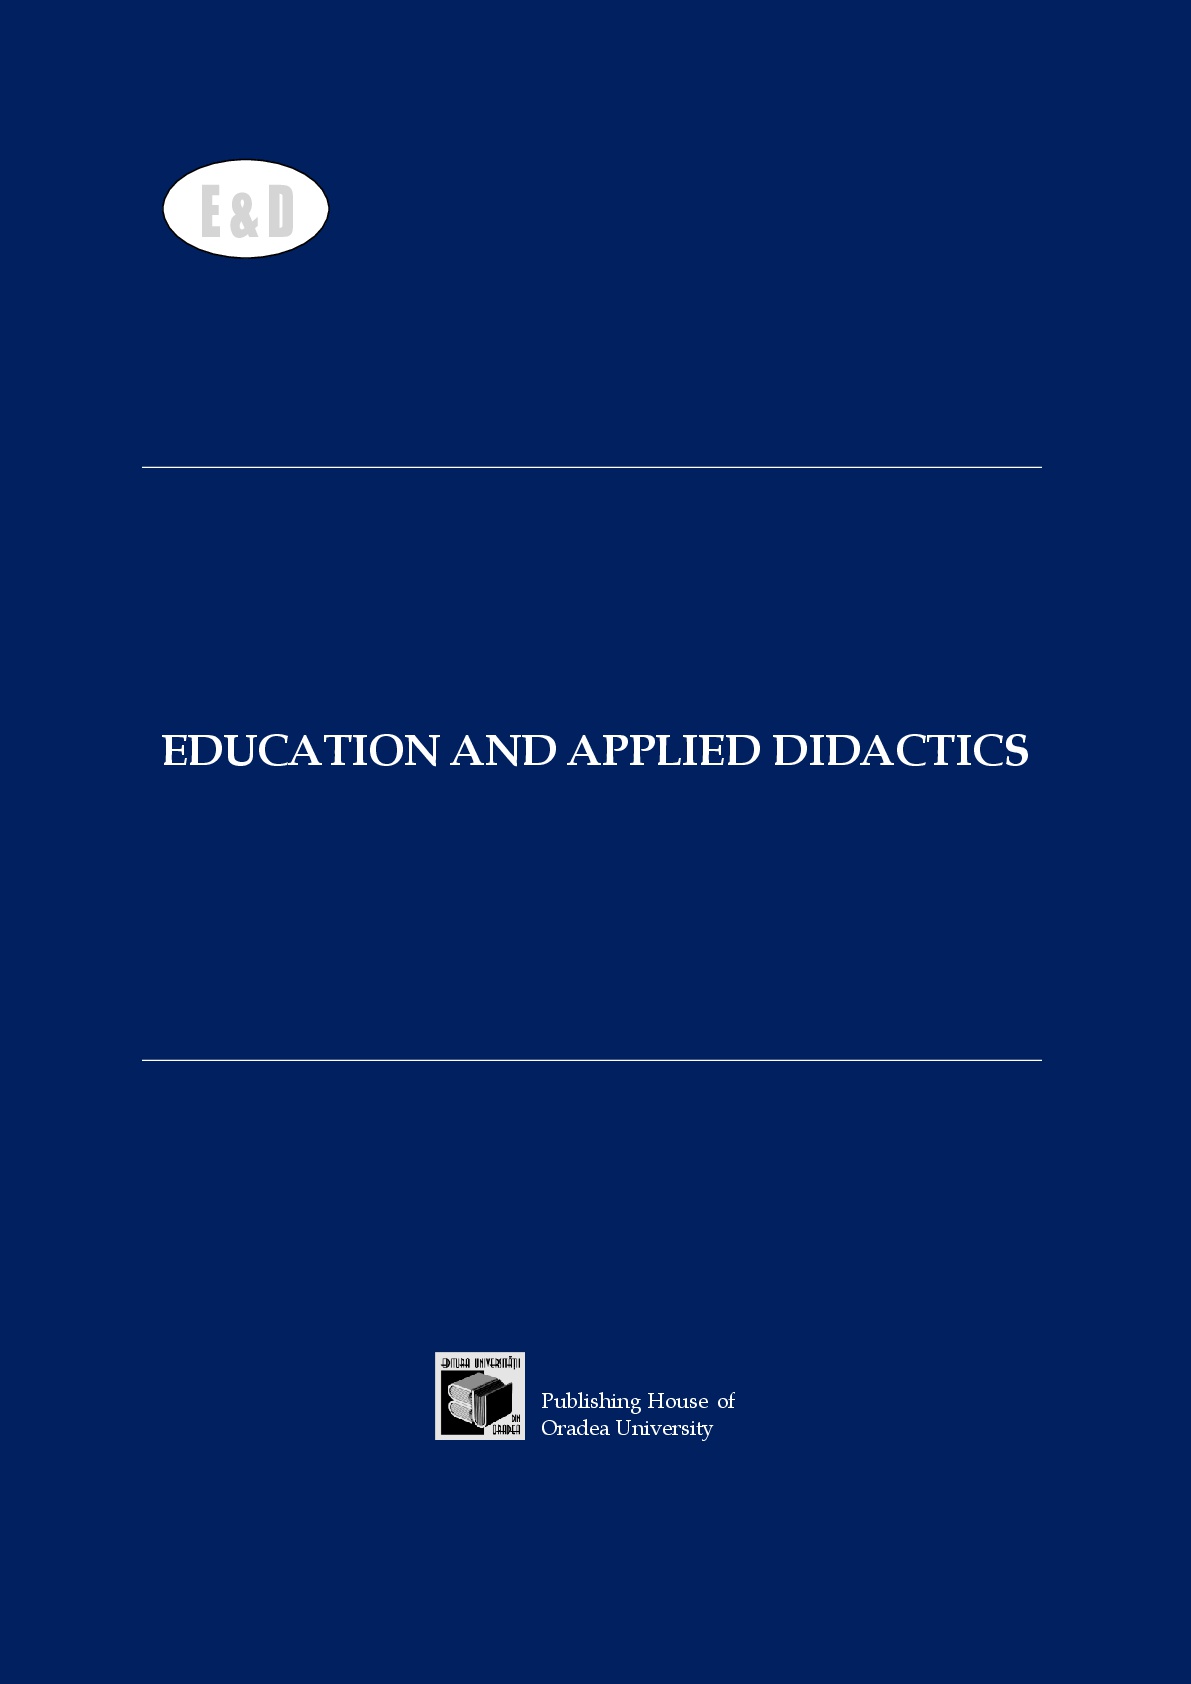 A GROUP OF TEACHER’S PERSPECTIVE AND USE OF CURRICULAR ADAPTATIONS FOR CHILDREN WITH AUTISM SPECTRUM DISORDERS IN MAINSTREAM SCHOOL